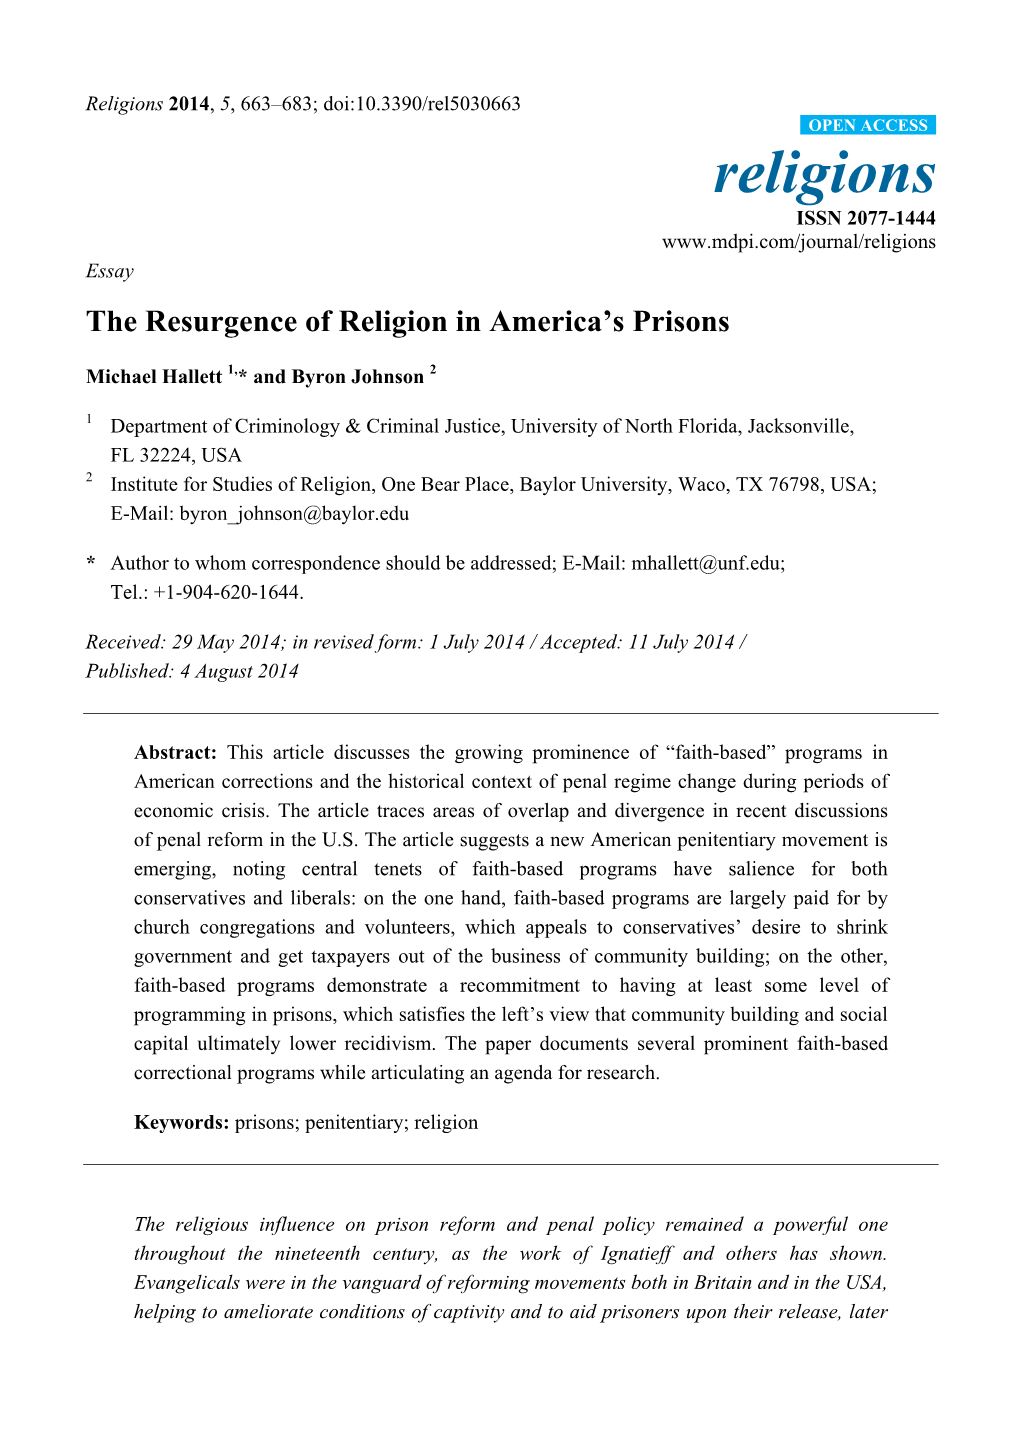 The Resurgence of Religion in America's Prisons